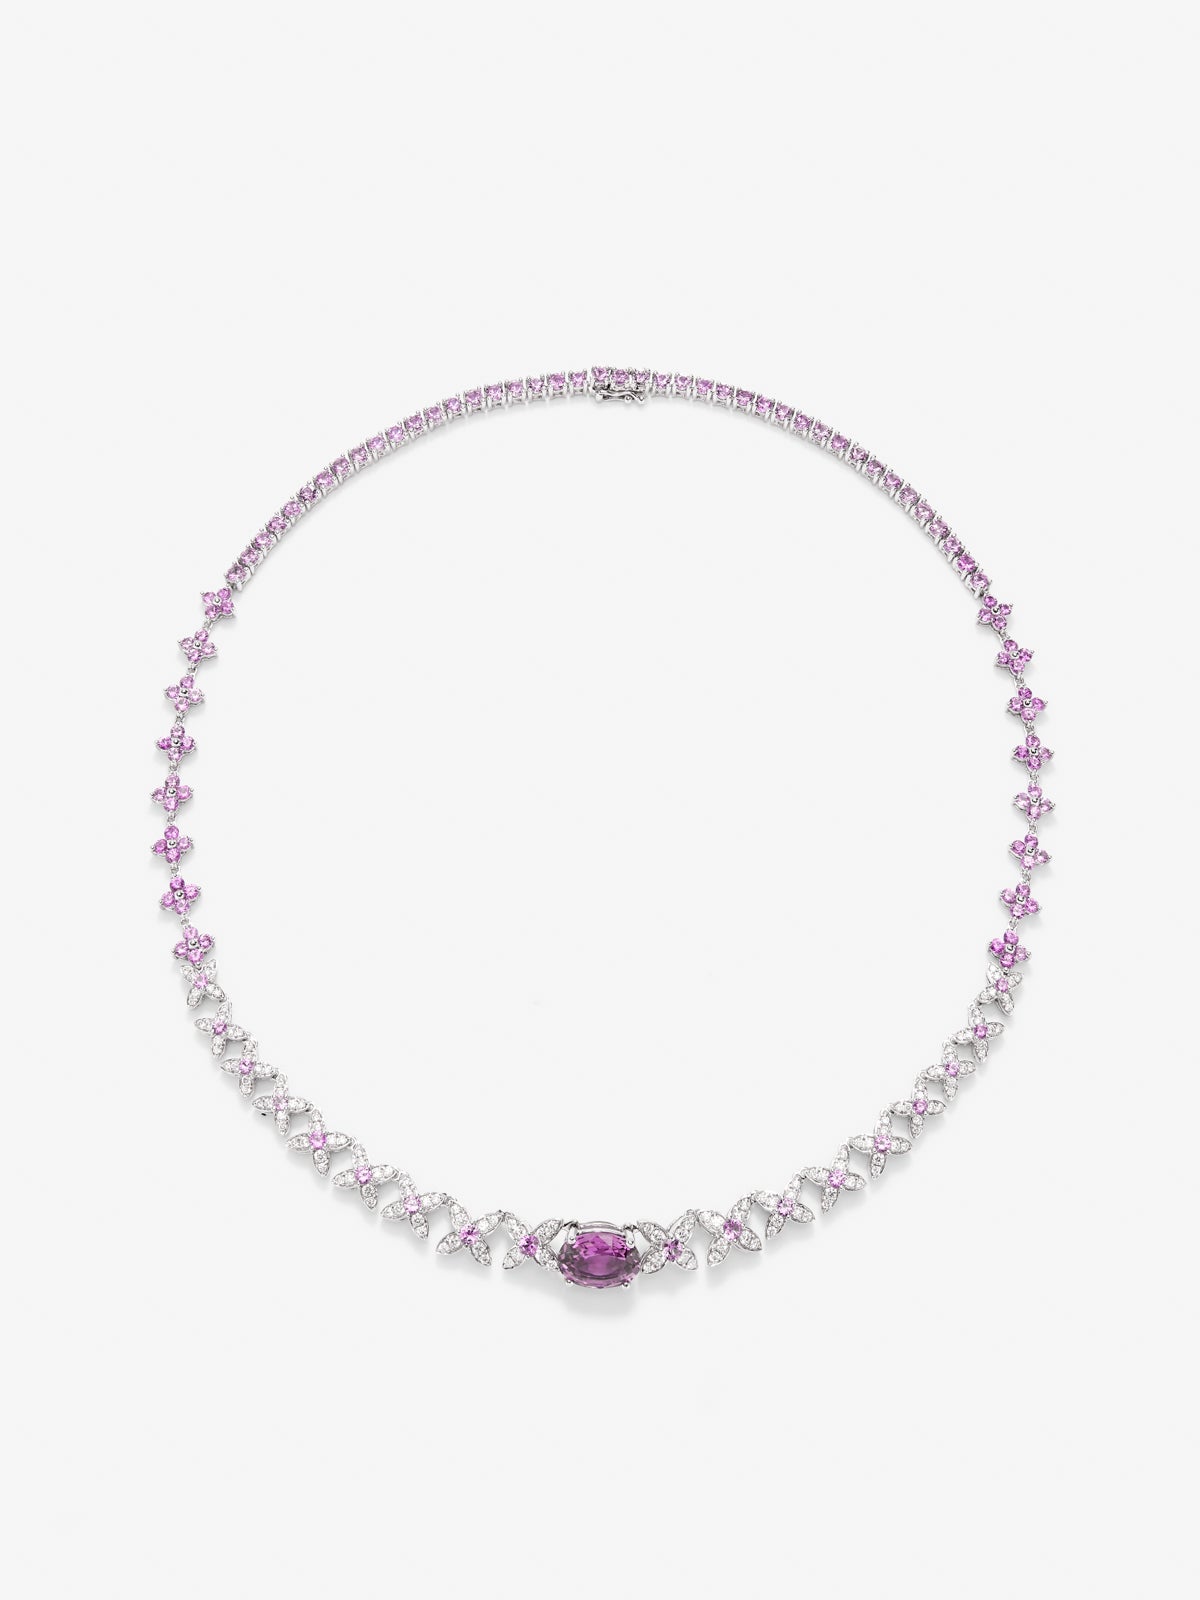 18K white gold necklace with pink sapphries in 15.02 cts and white diamonds in a brilliant 1.52 cts white diamonds